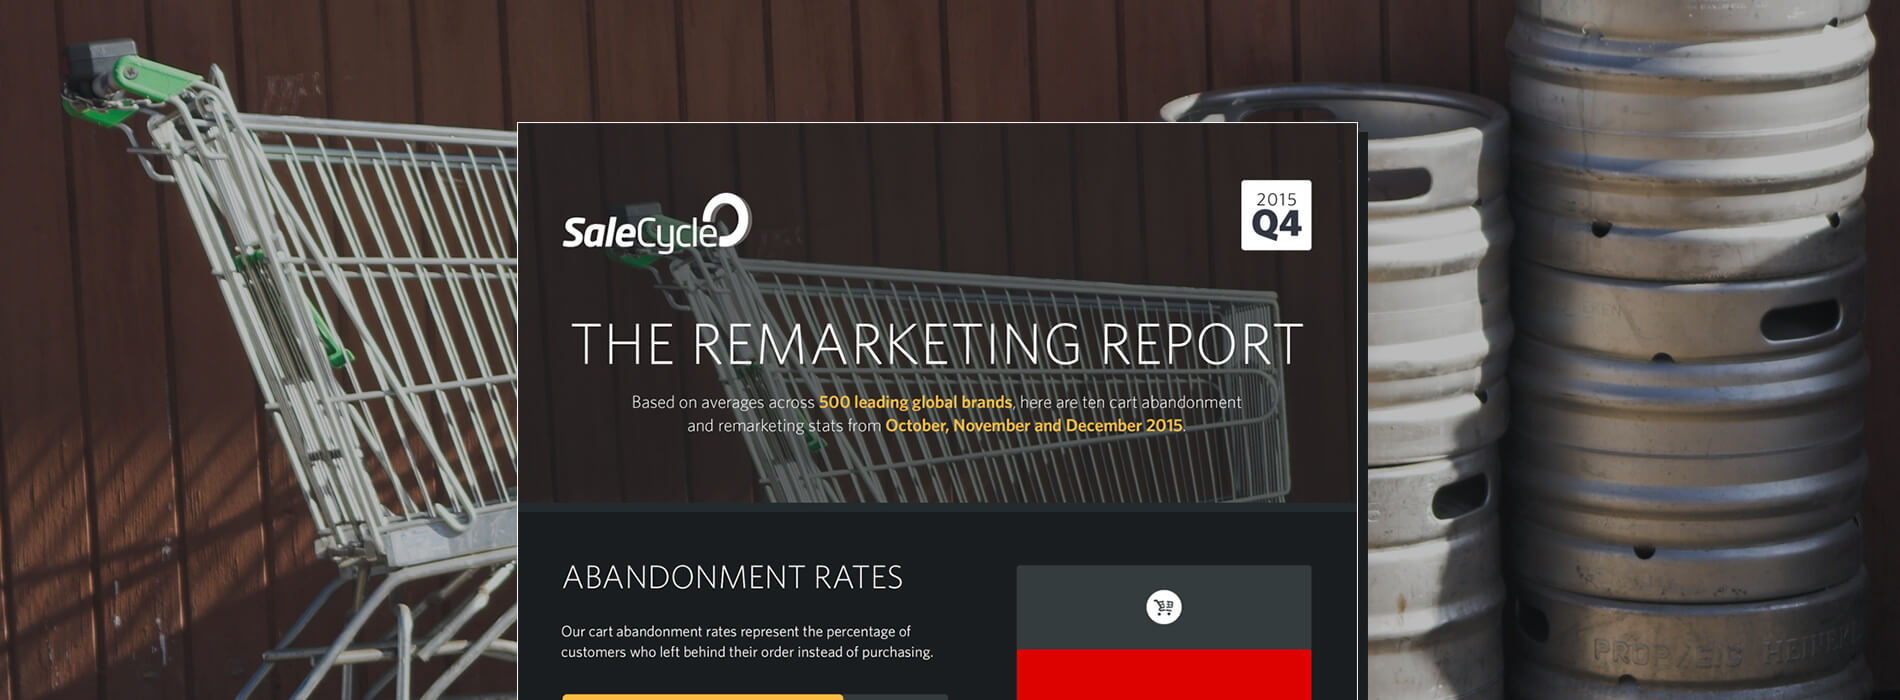 [Infographic] The Remarketing Report – Q4 2015